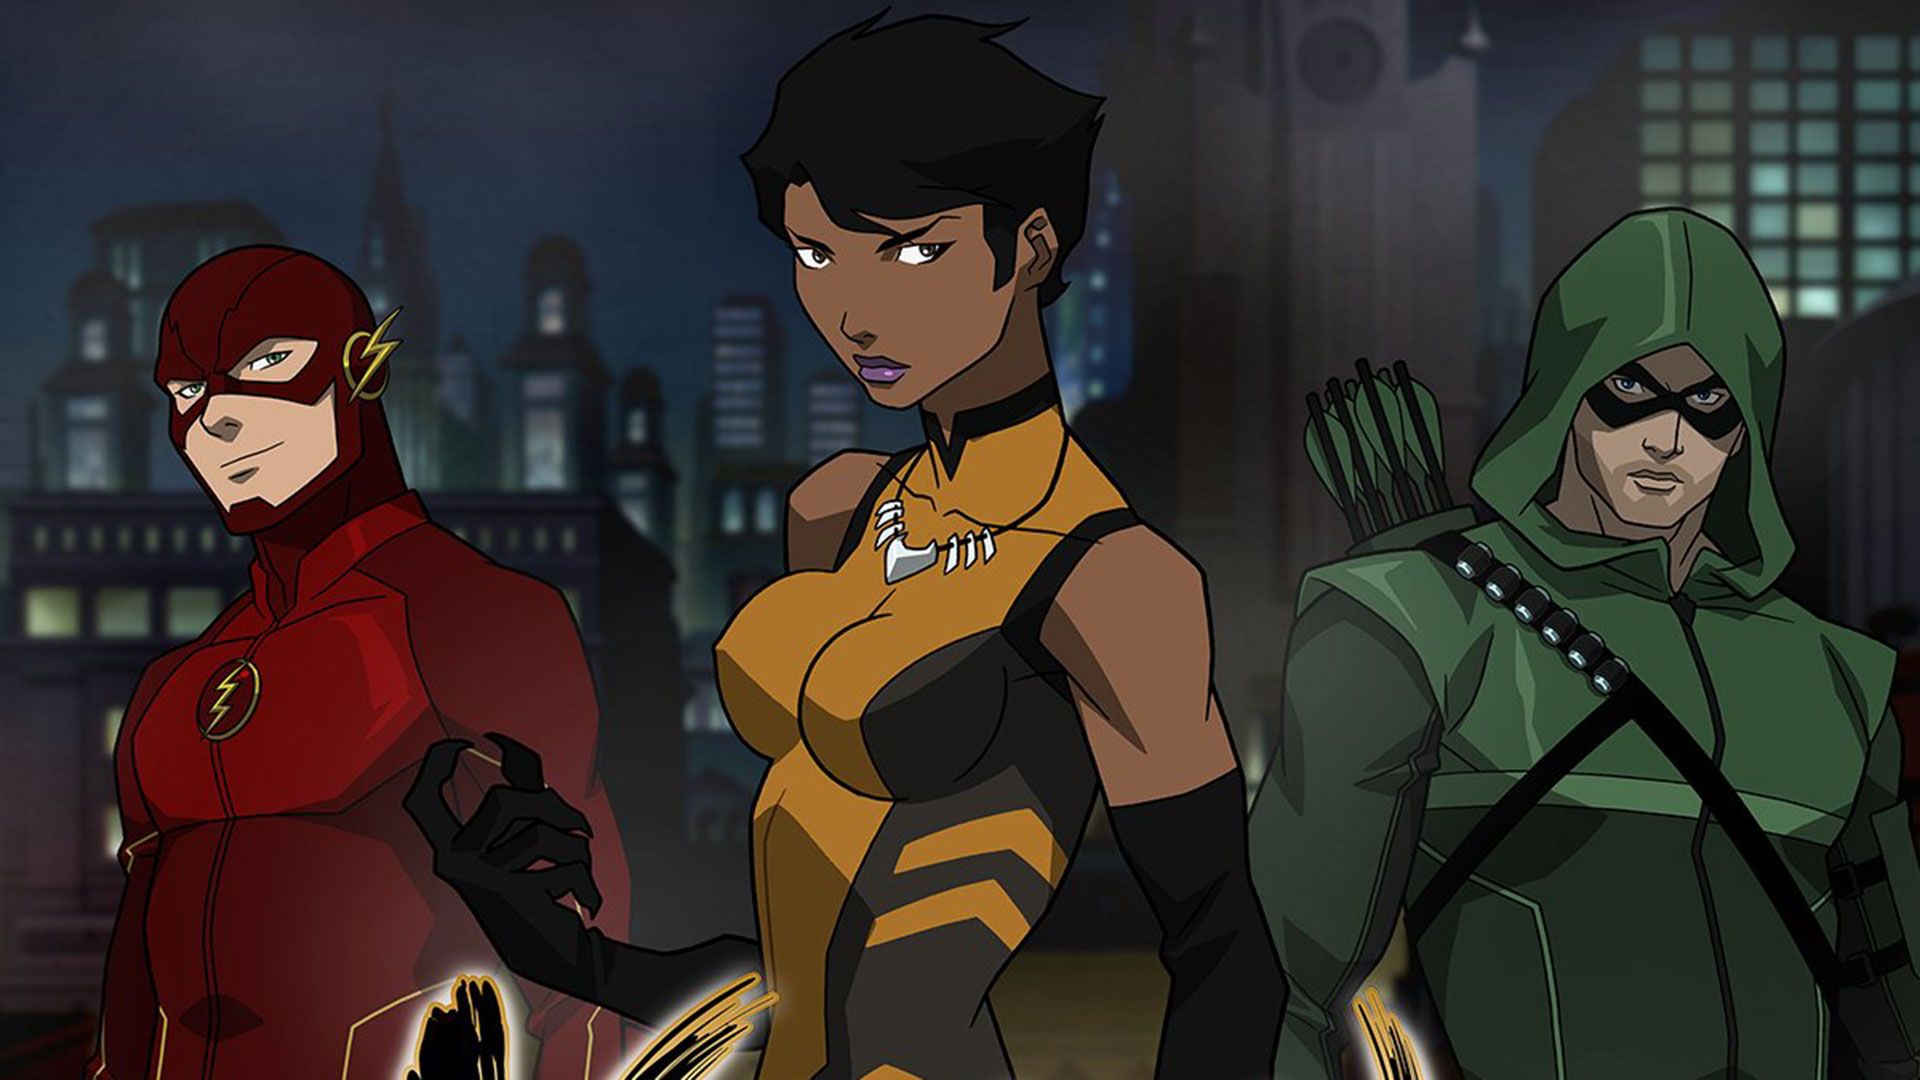 Animated Vixen series for CW, Arrowverse, with Green Arrow and Flash